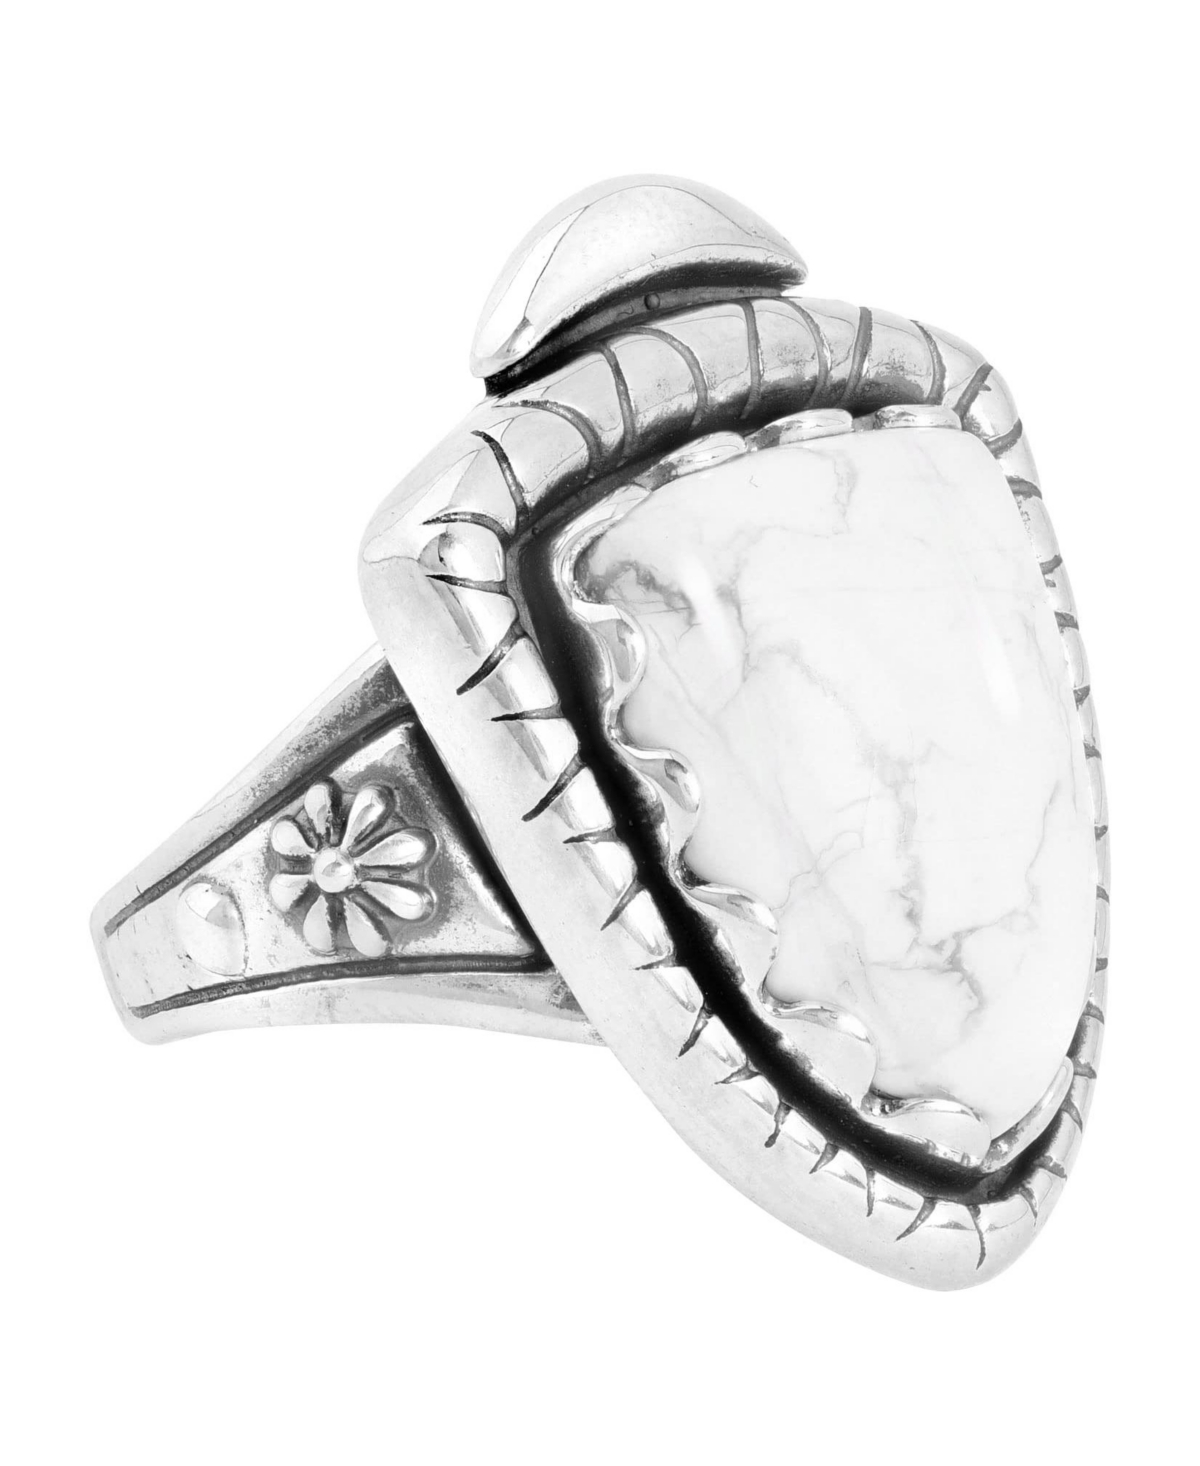 Sterling Silver and Genuine Gemstone Arrowhead Ring, Sizes 5-10 - White howlite